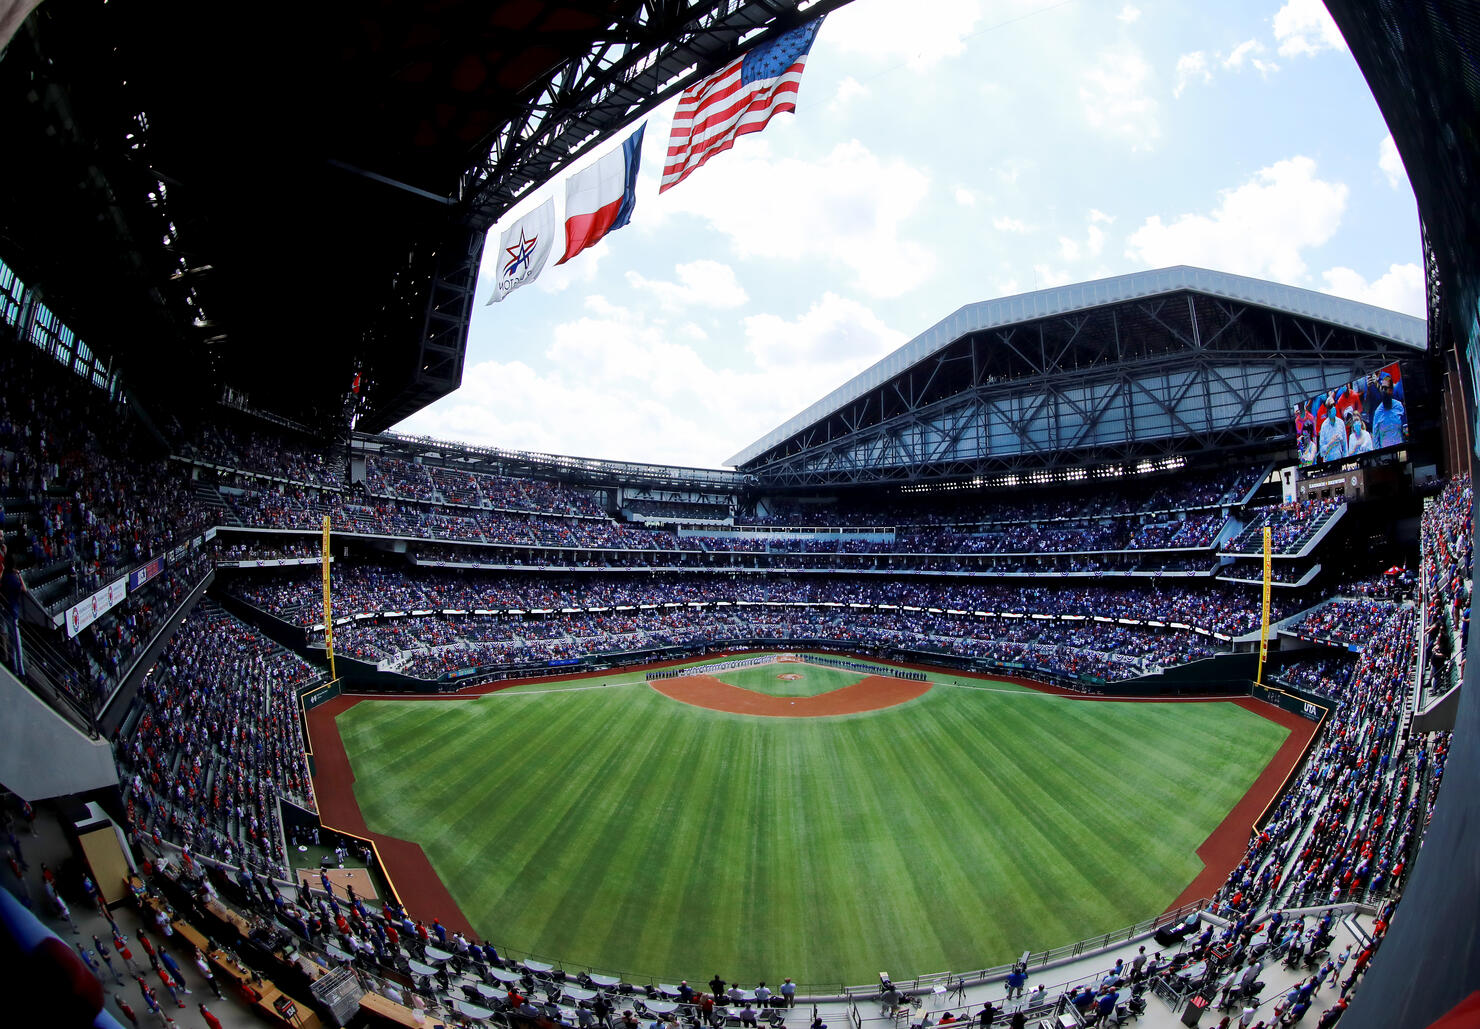 PHOTOS Here's What Globe Life Looked Like For Texas Rangers' Home